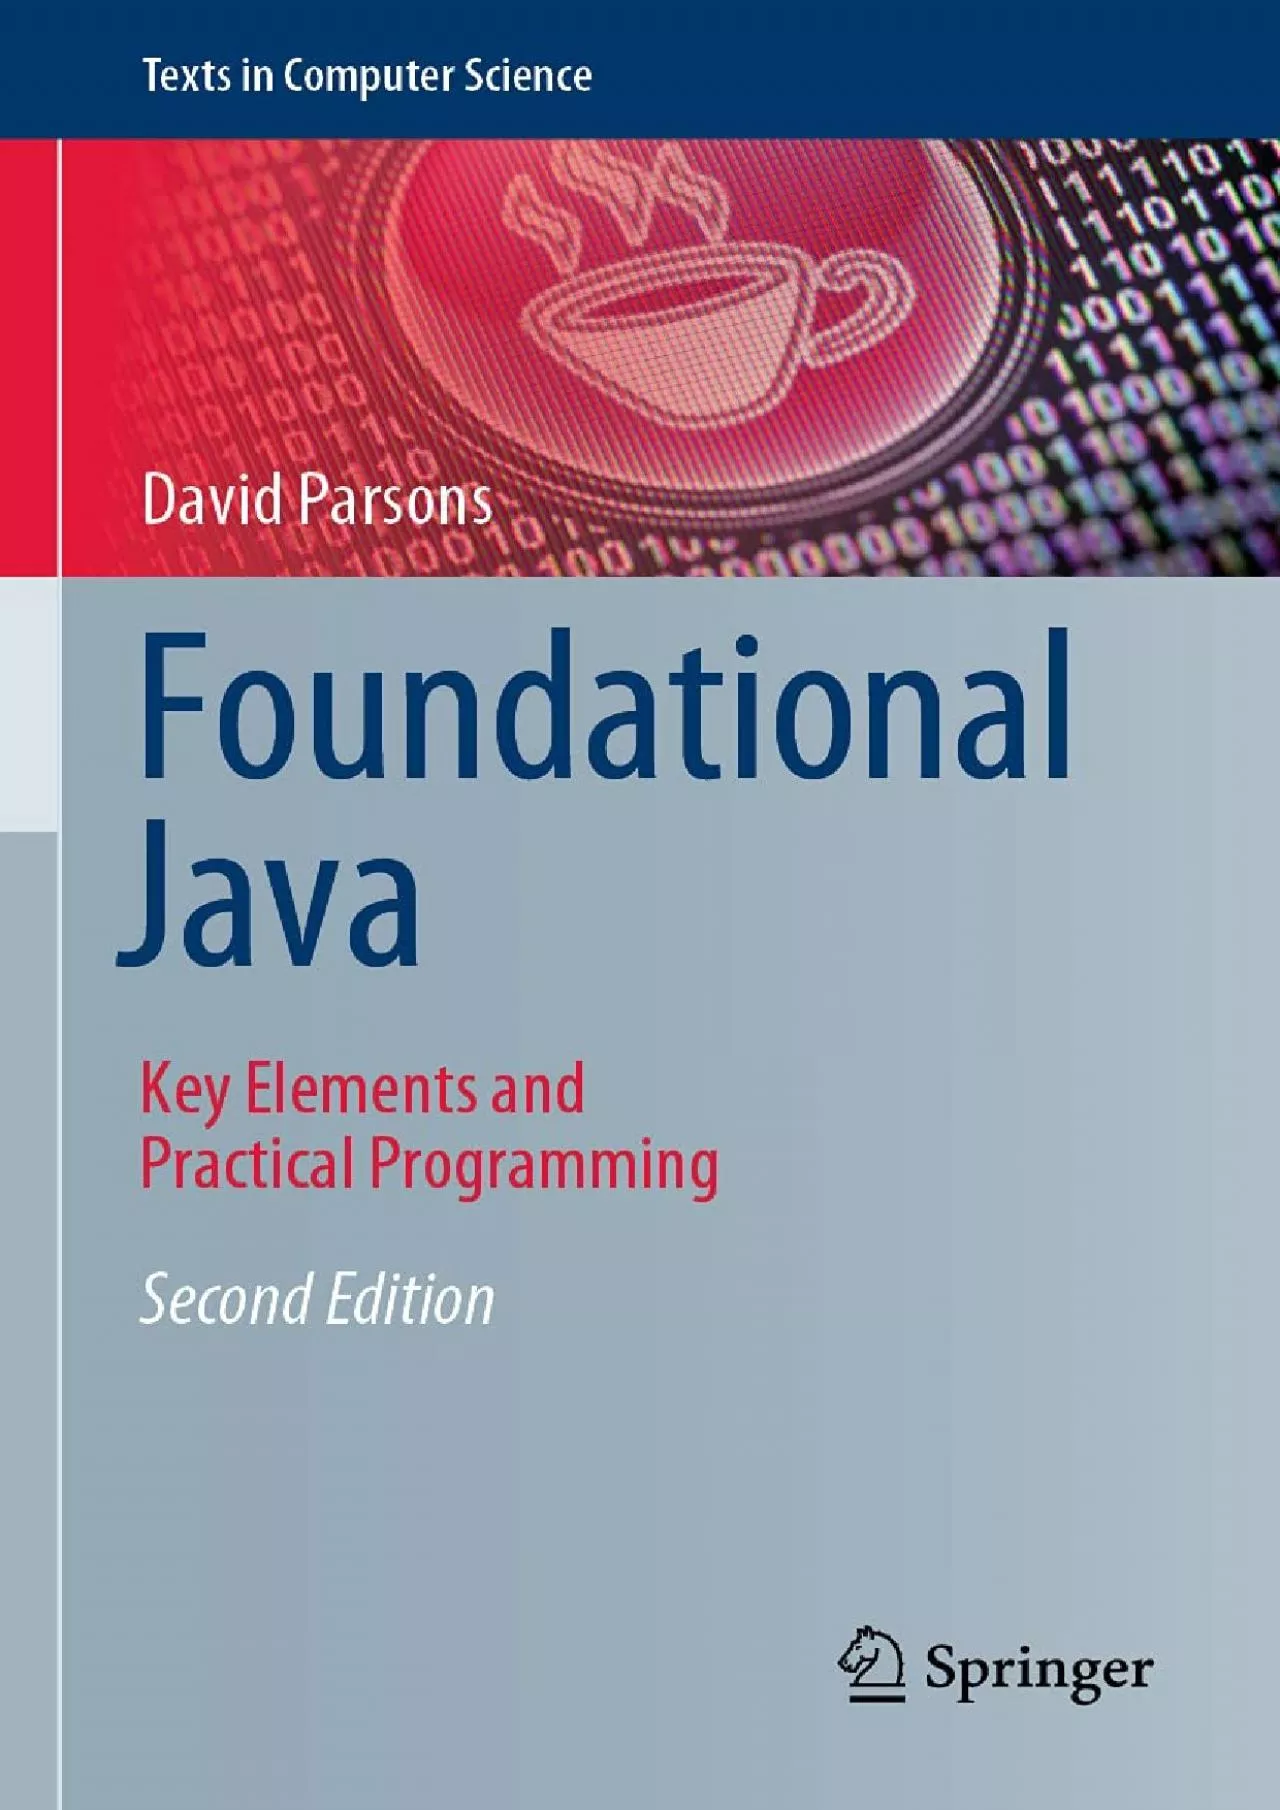 [READING BOOK]-Foundational Java: Key Elements and Practical Programming (Texts in Computer